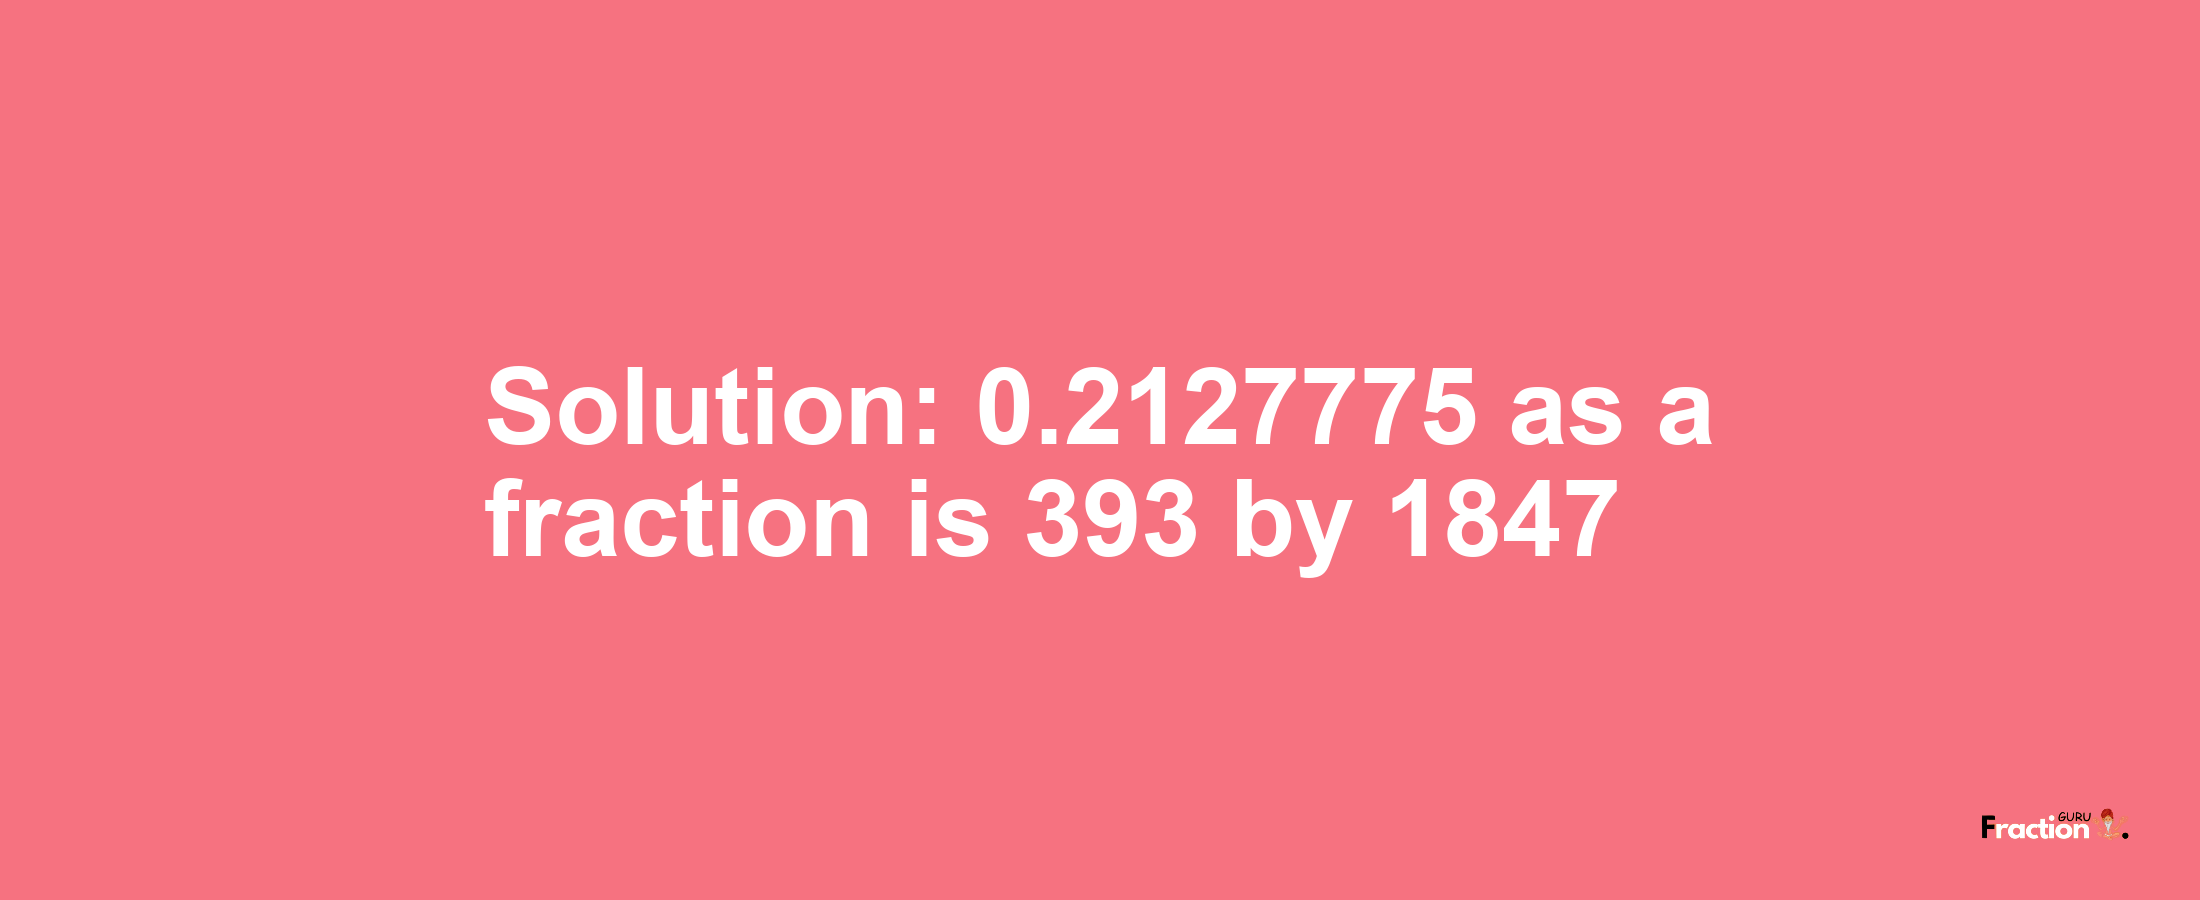 Solution:0.2127775 as a fraction is 393/1847